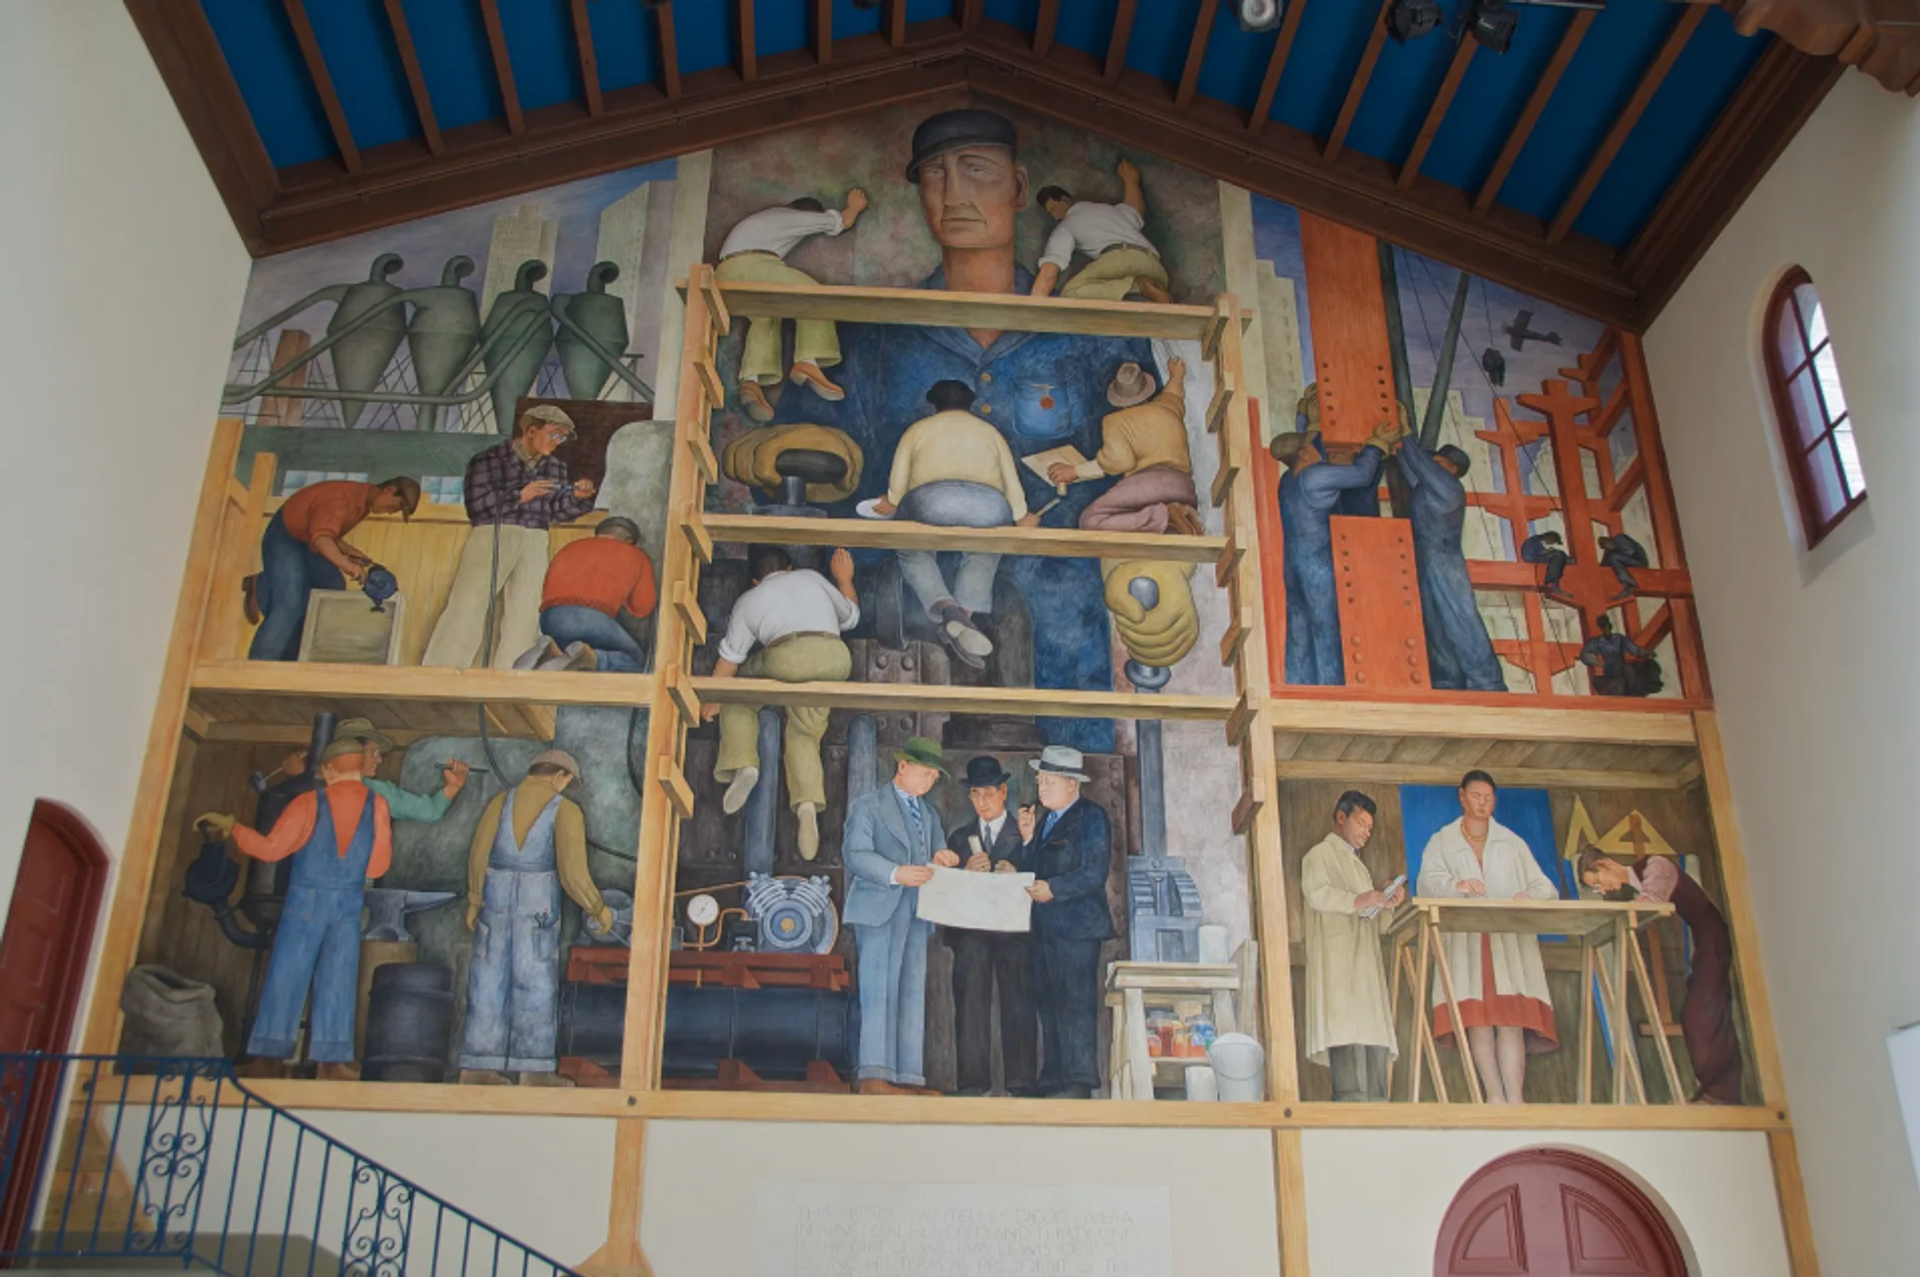 Diego Rivera's The Making of a Fresco Showing the Building of a City (1931) at the San Francisco Art Institute. Photo: Steve Rhodes.